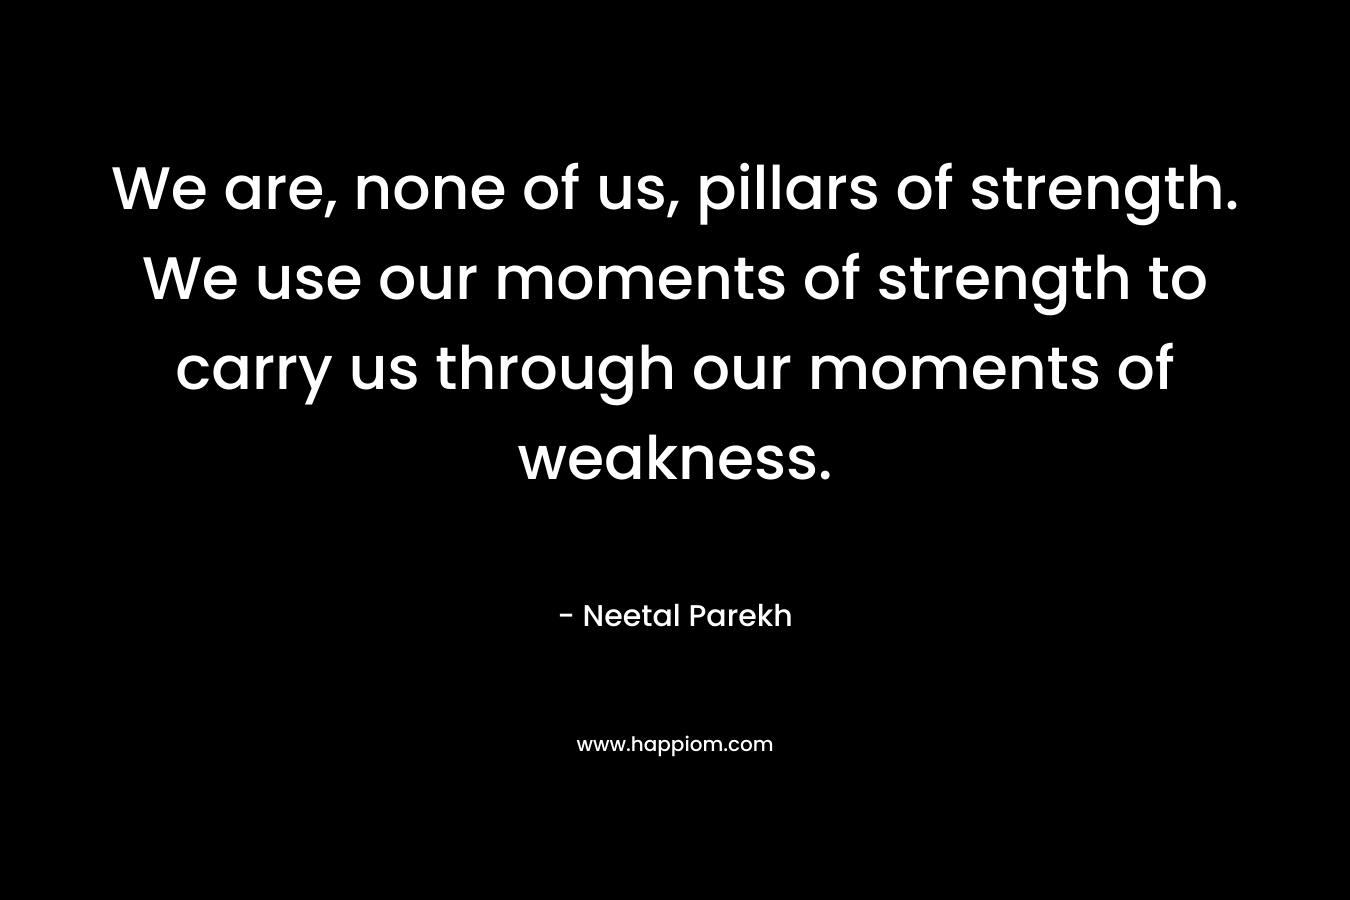 We are, none of us, pillars of strength. We use our moments of strength to carry us through our moments of weakness. – Neetal Parekh